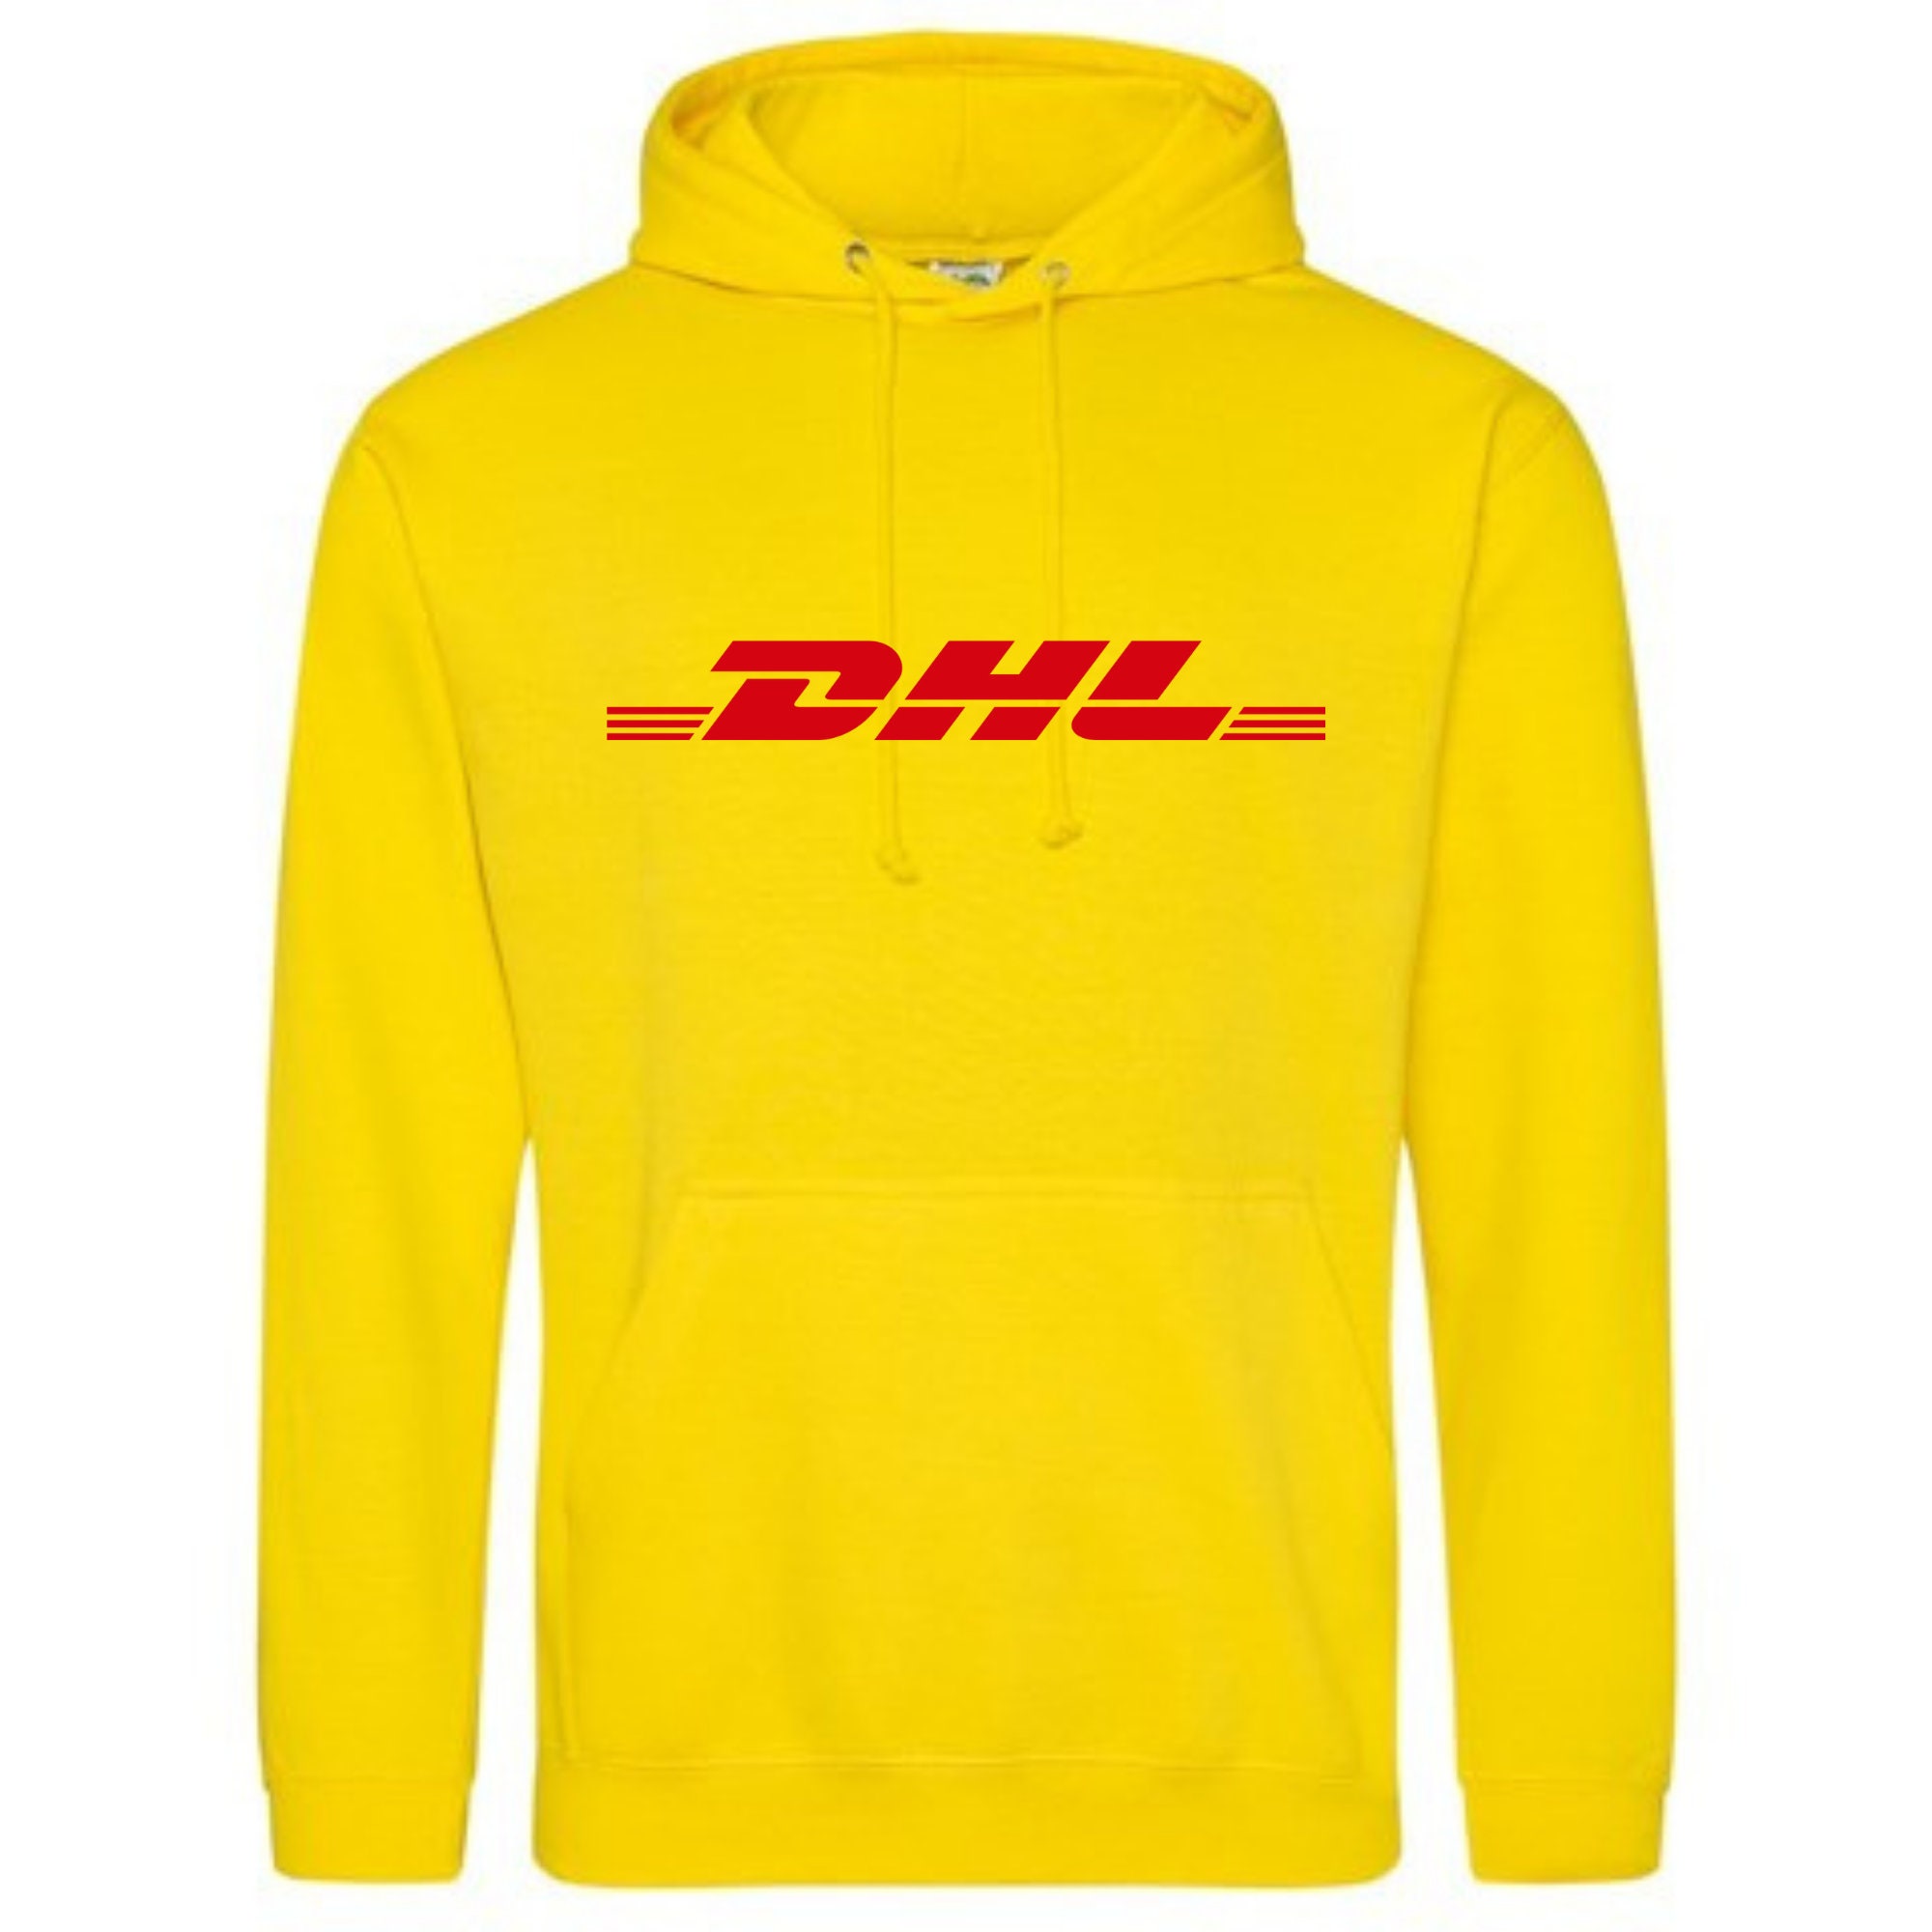 Adults Dhl Hoody Inspired Unofficial Funny Hoodie - Etsy New Zealand